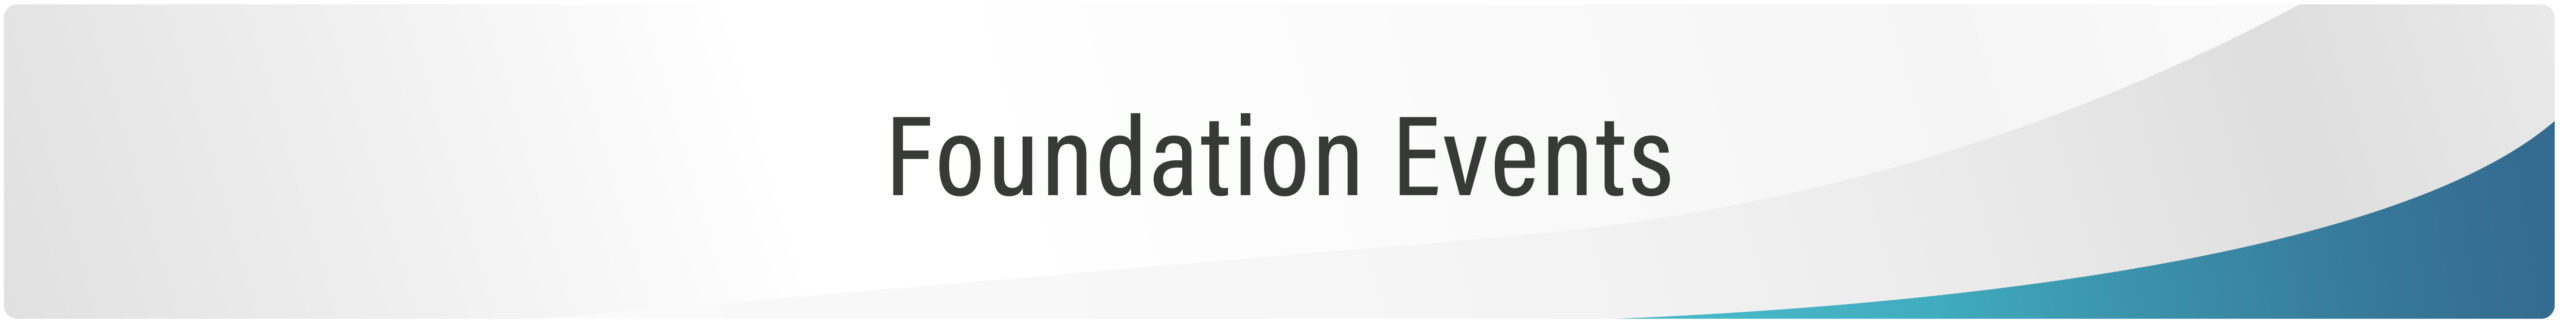 foundation events